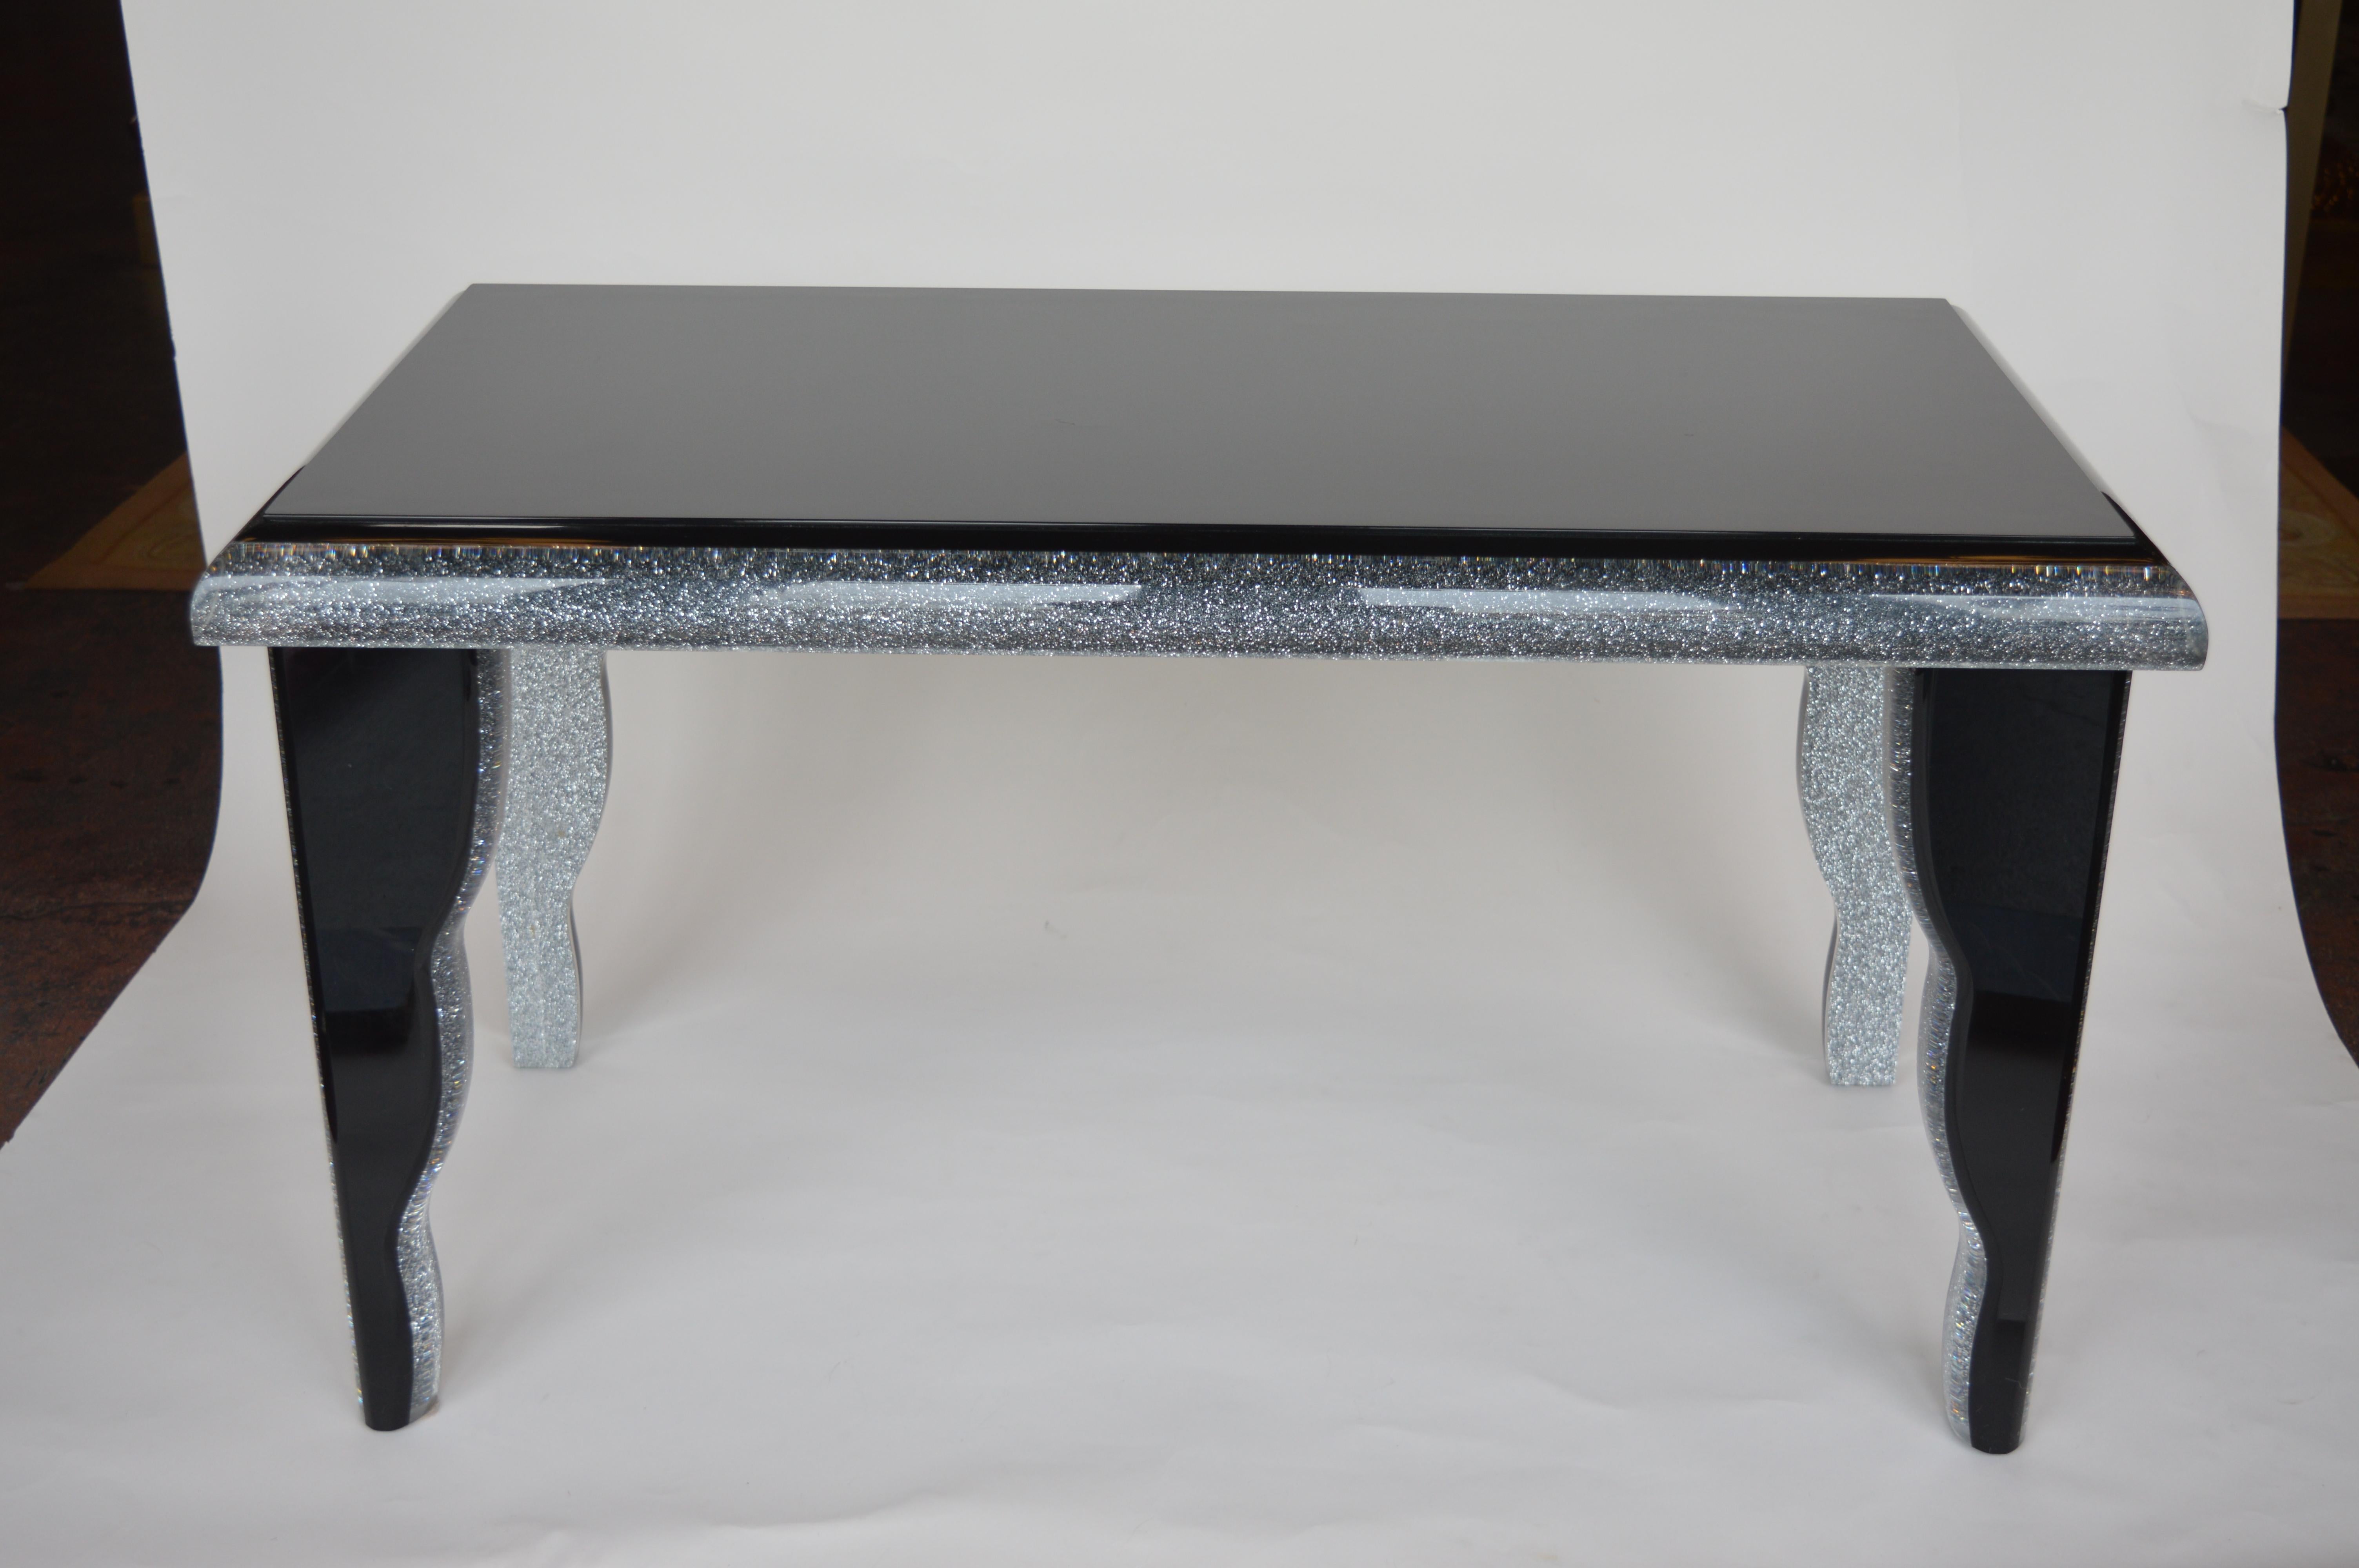 Lucite coffee table with inner trim in silver glitter.